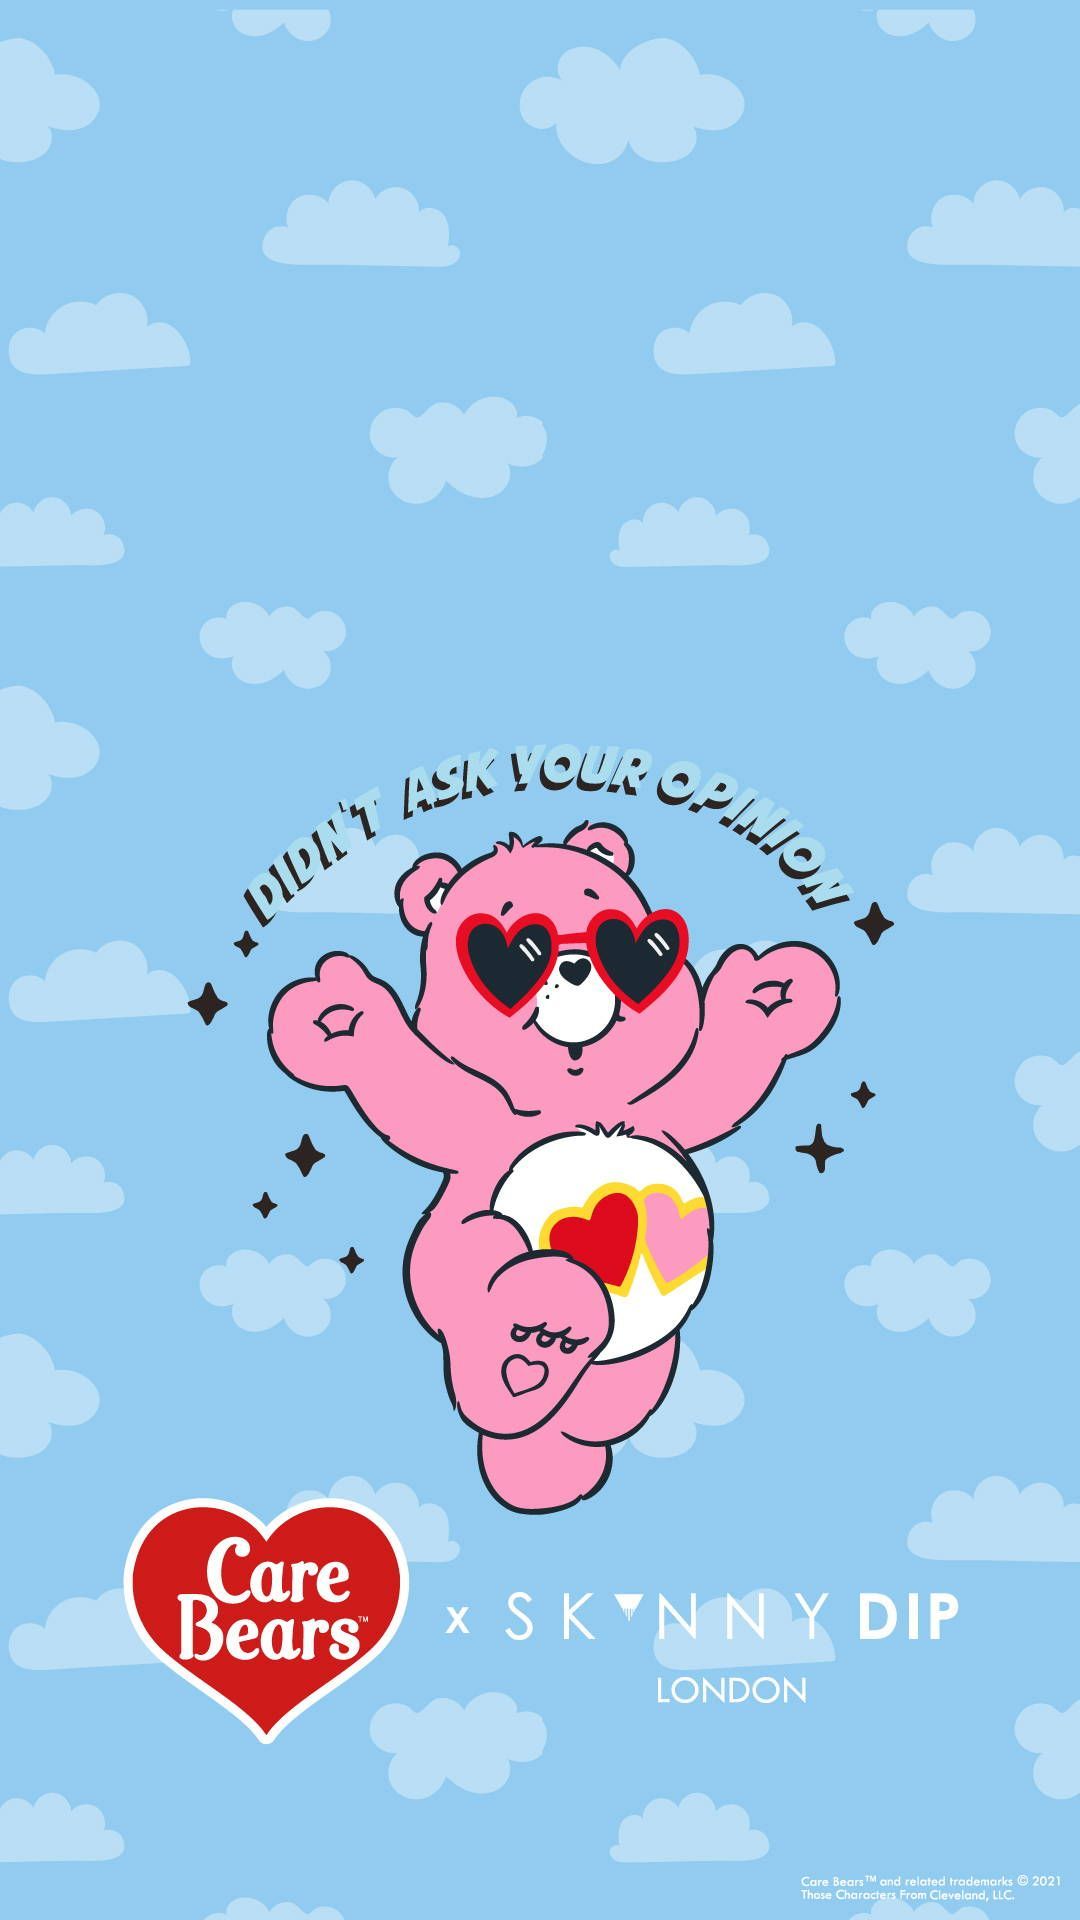 IPhone wallpaper with a pink bear wearing sunglasses - Care Bears